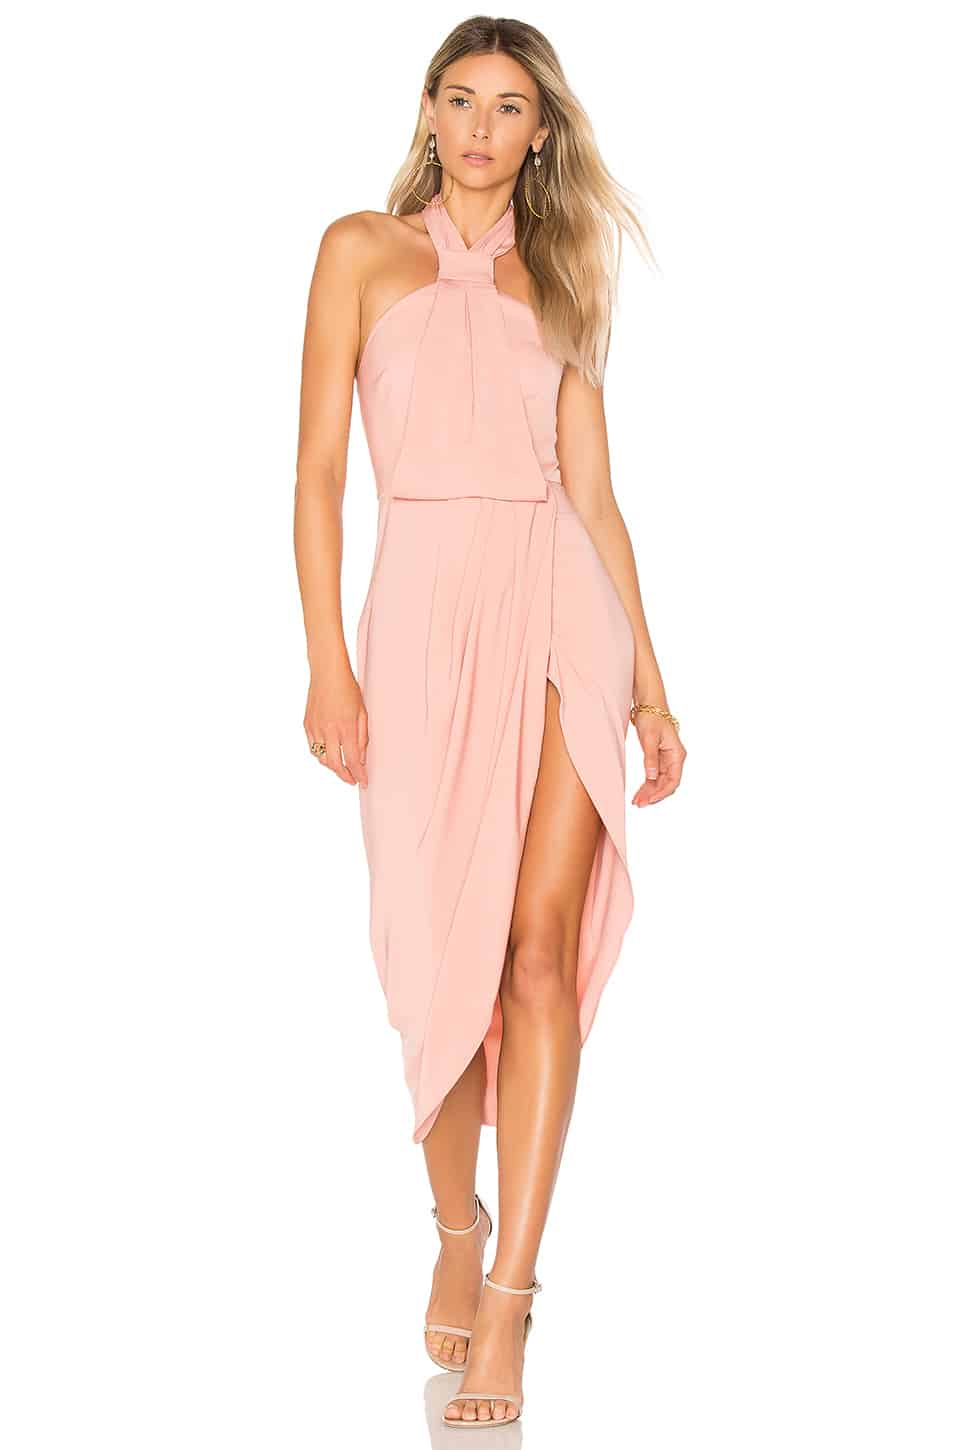 Great Light Pink Wedding Guest Dress of the decade Don t miss out 